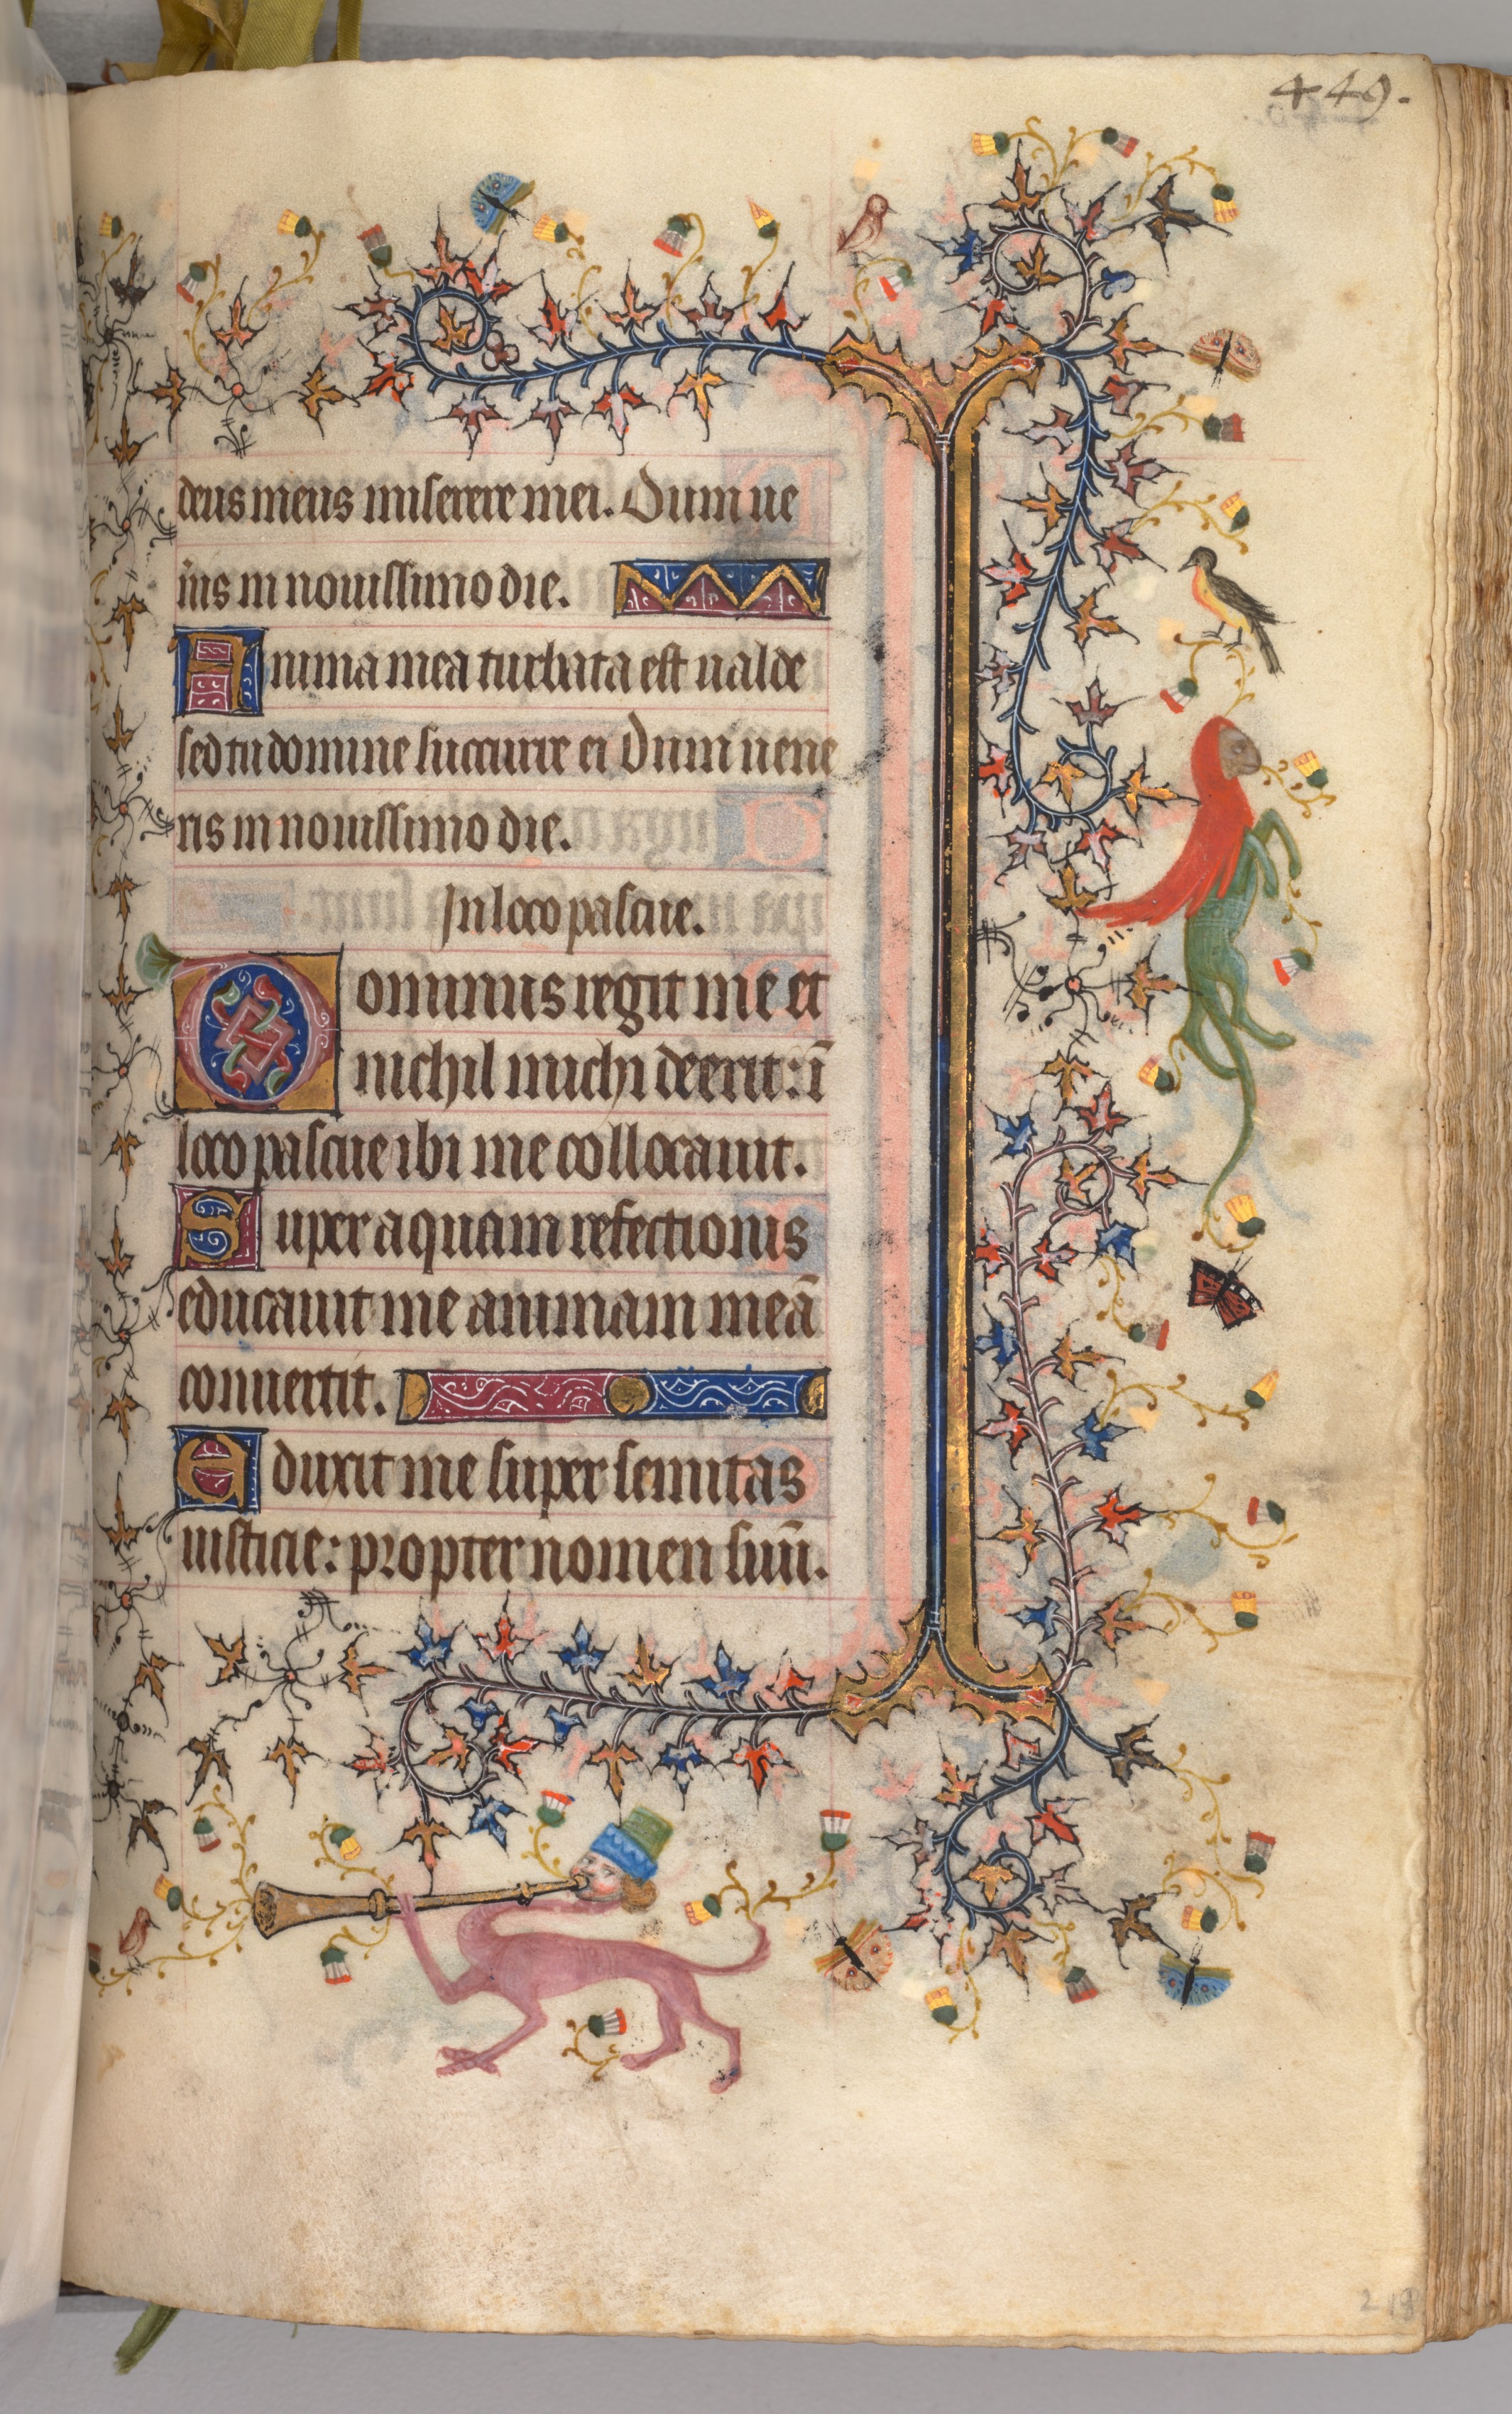 Hours of Charles the Noble, King of Navarre (1361-1425): fol. 219r, Text